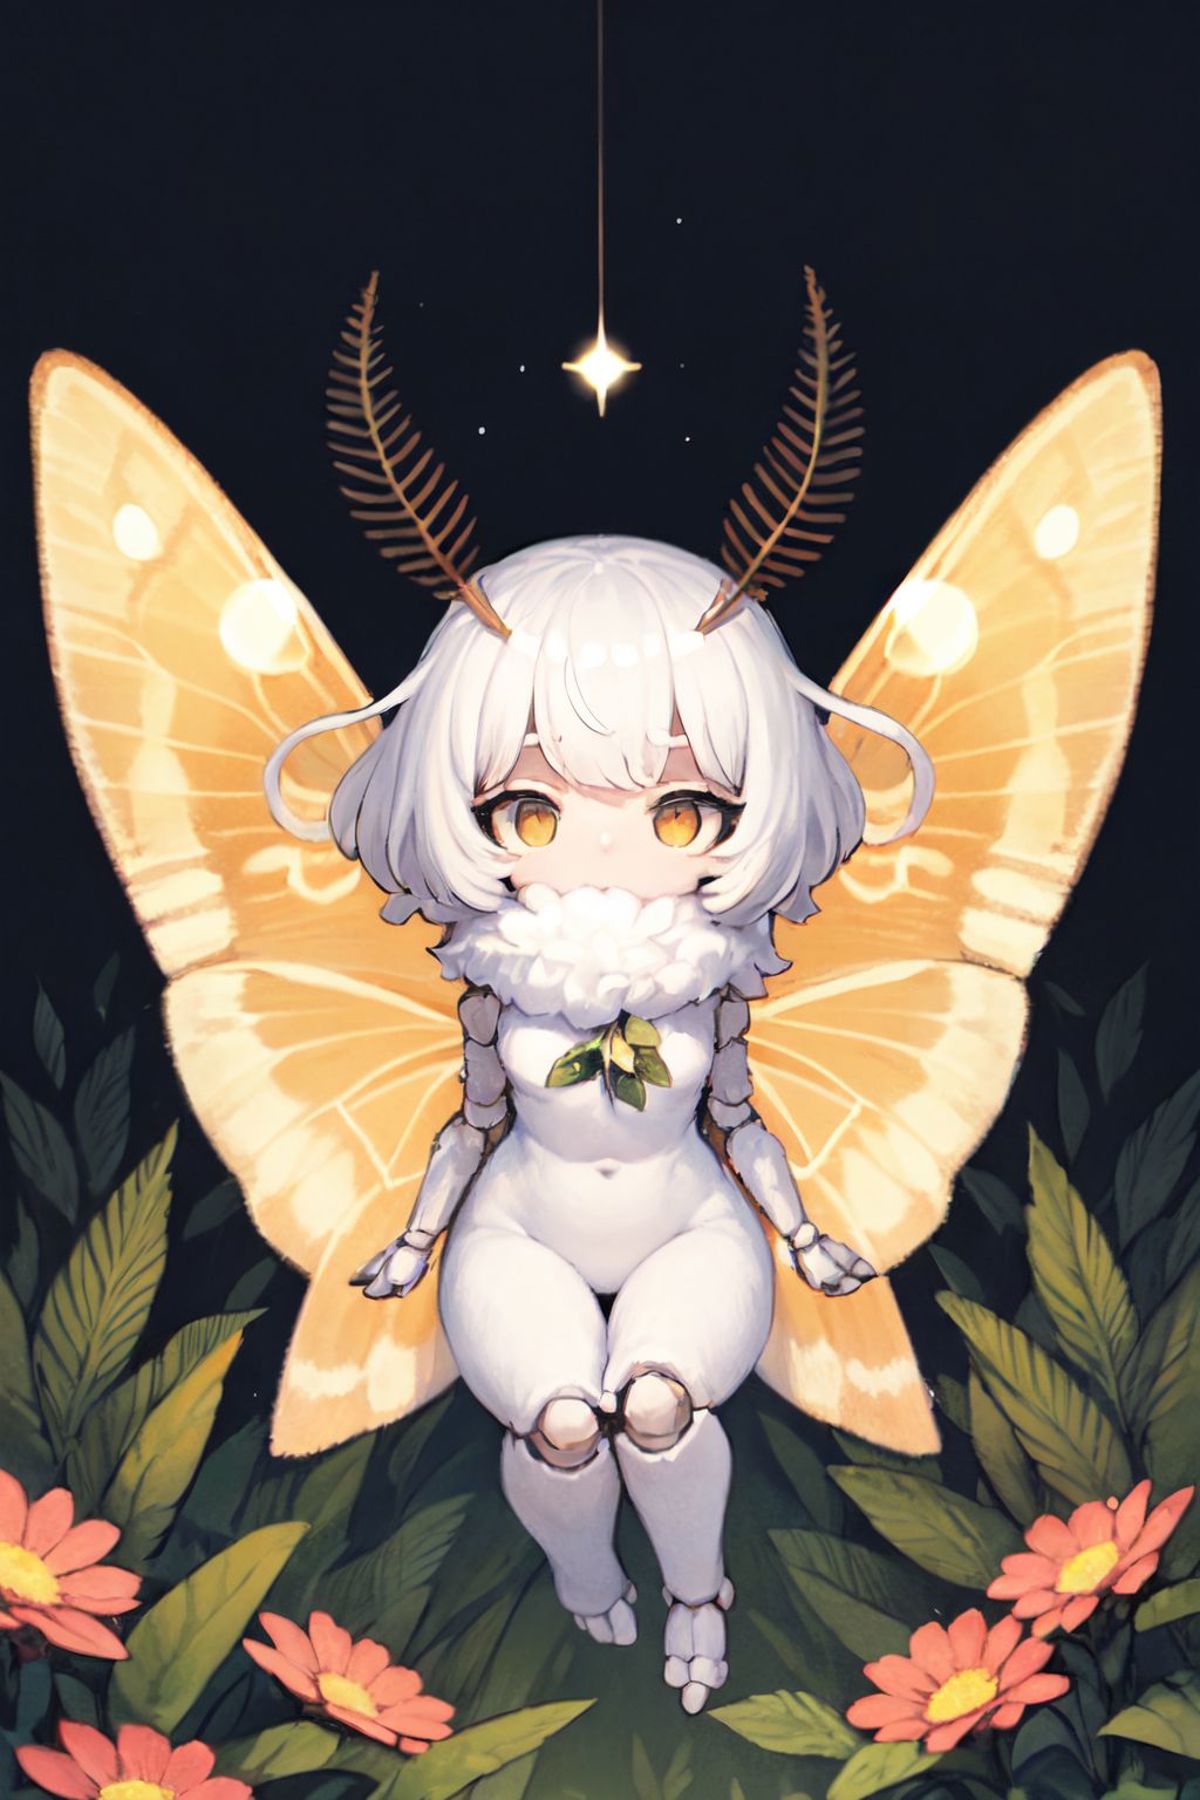 Moth girl concept image by reweik